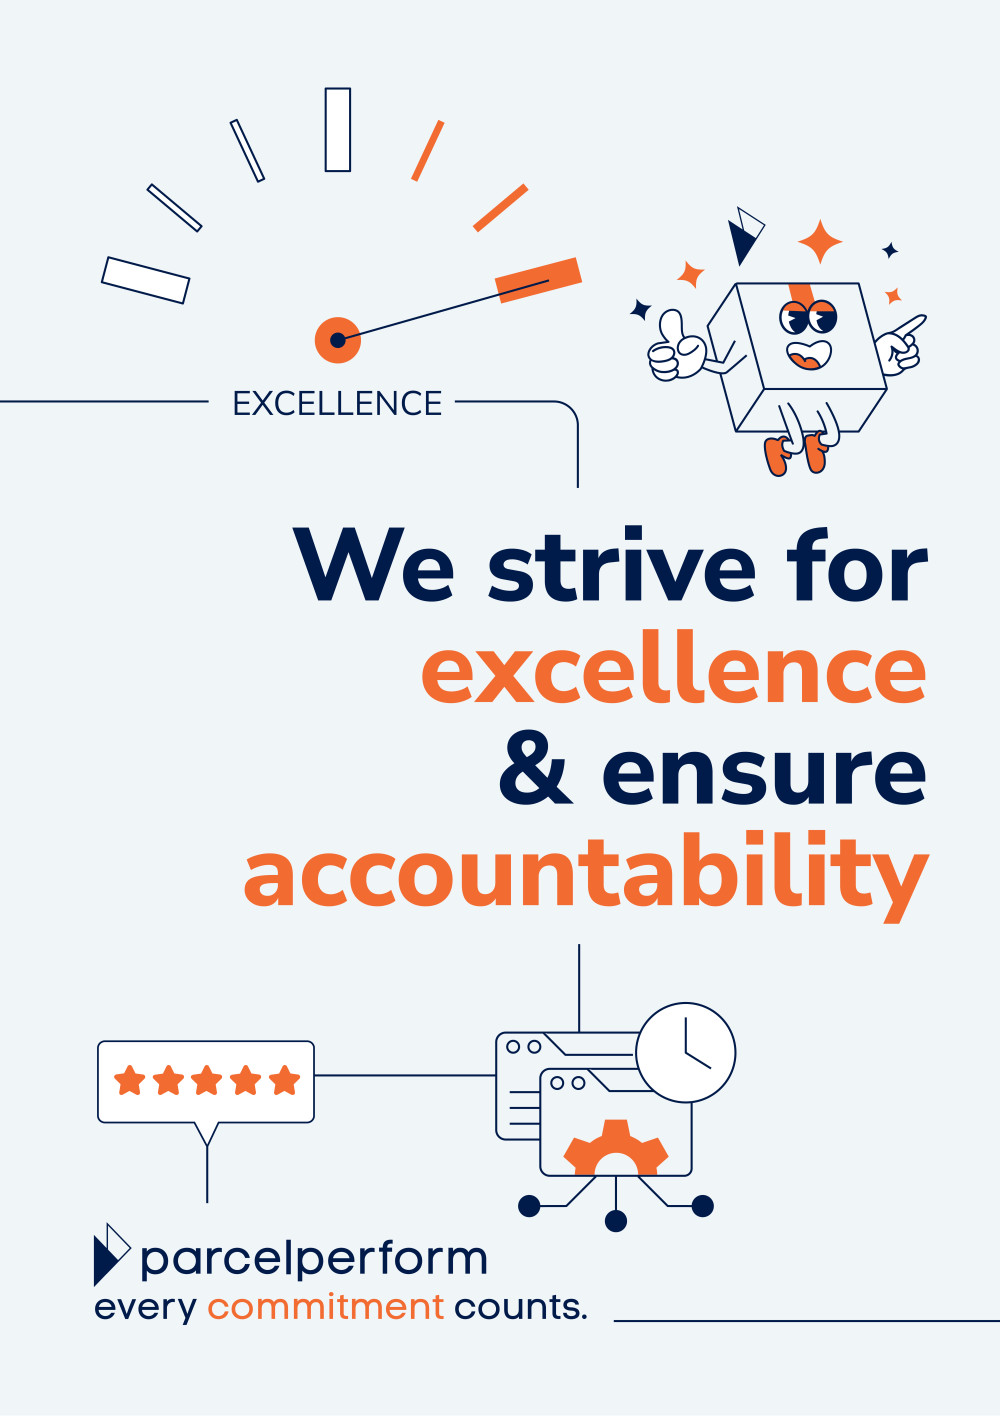 Parcel Perform culture value - We strive for excellence & ensure accountability